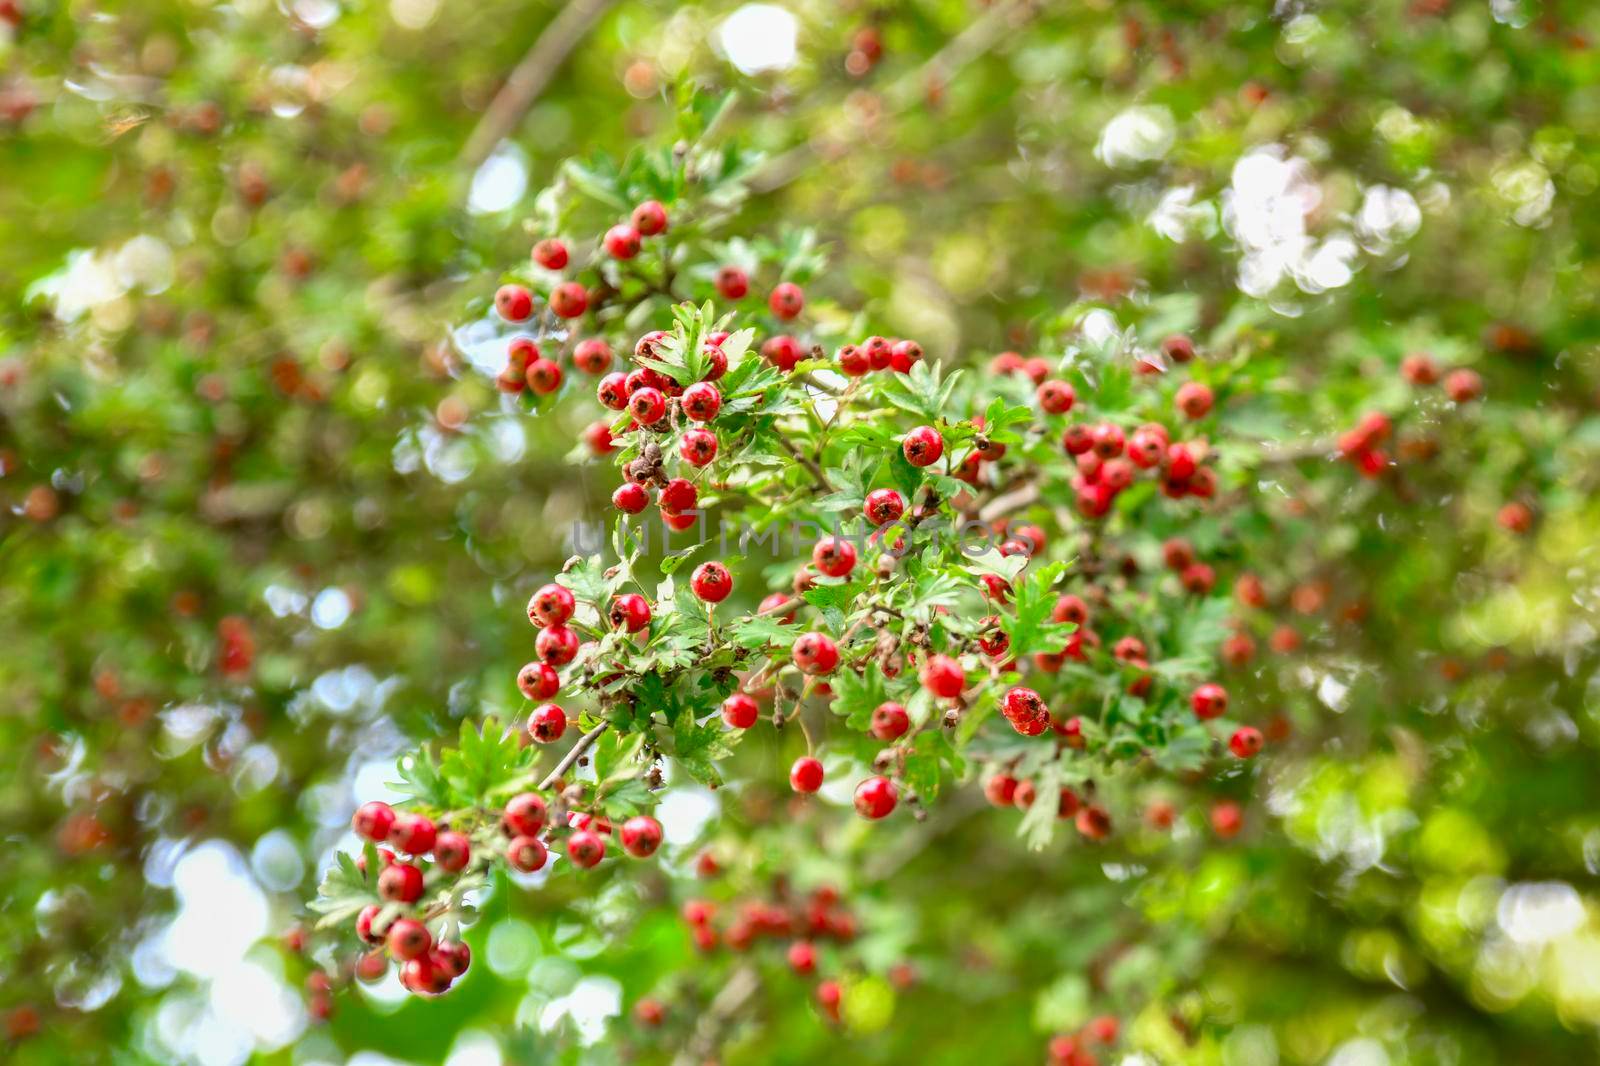 Hawthorn berries hang on the branches at autumn by Godi